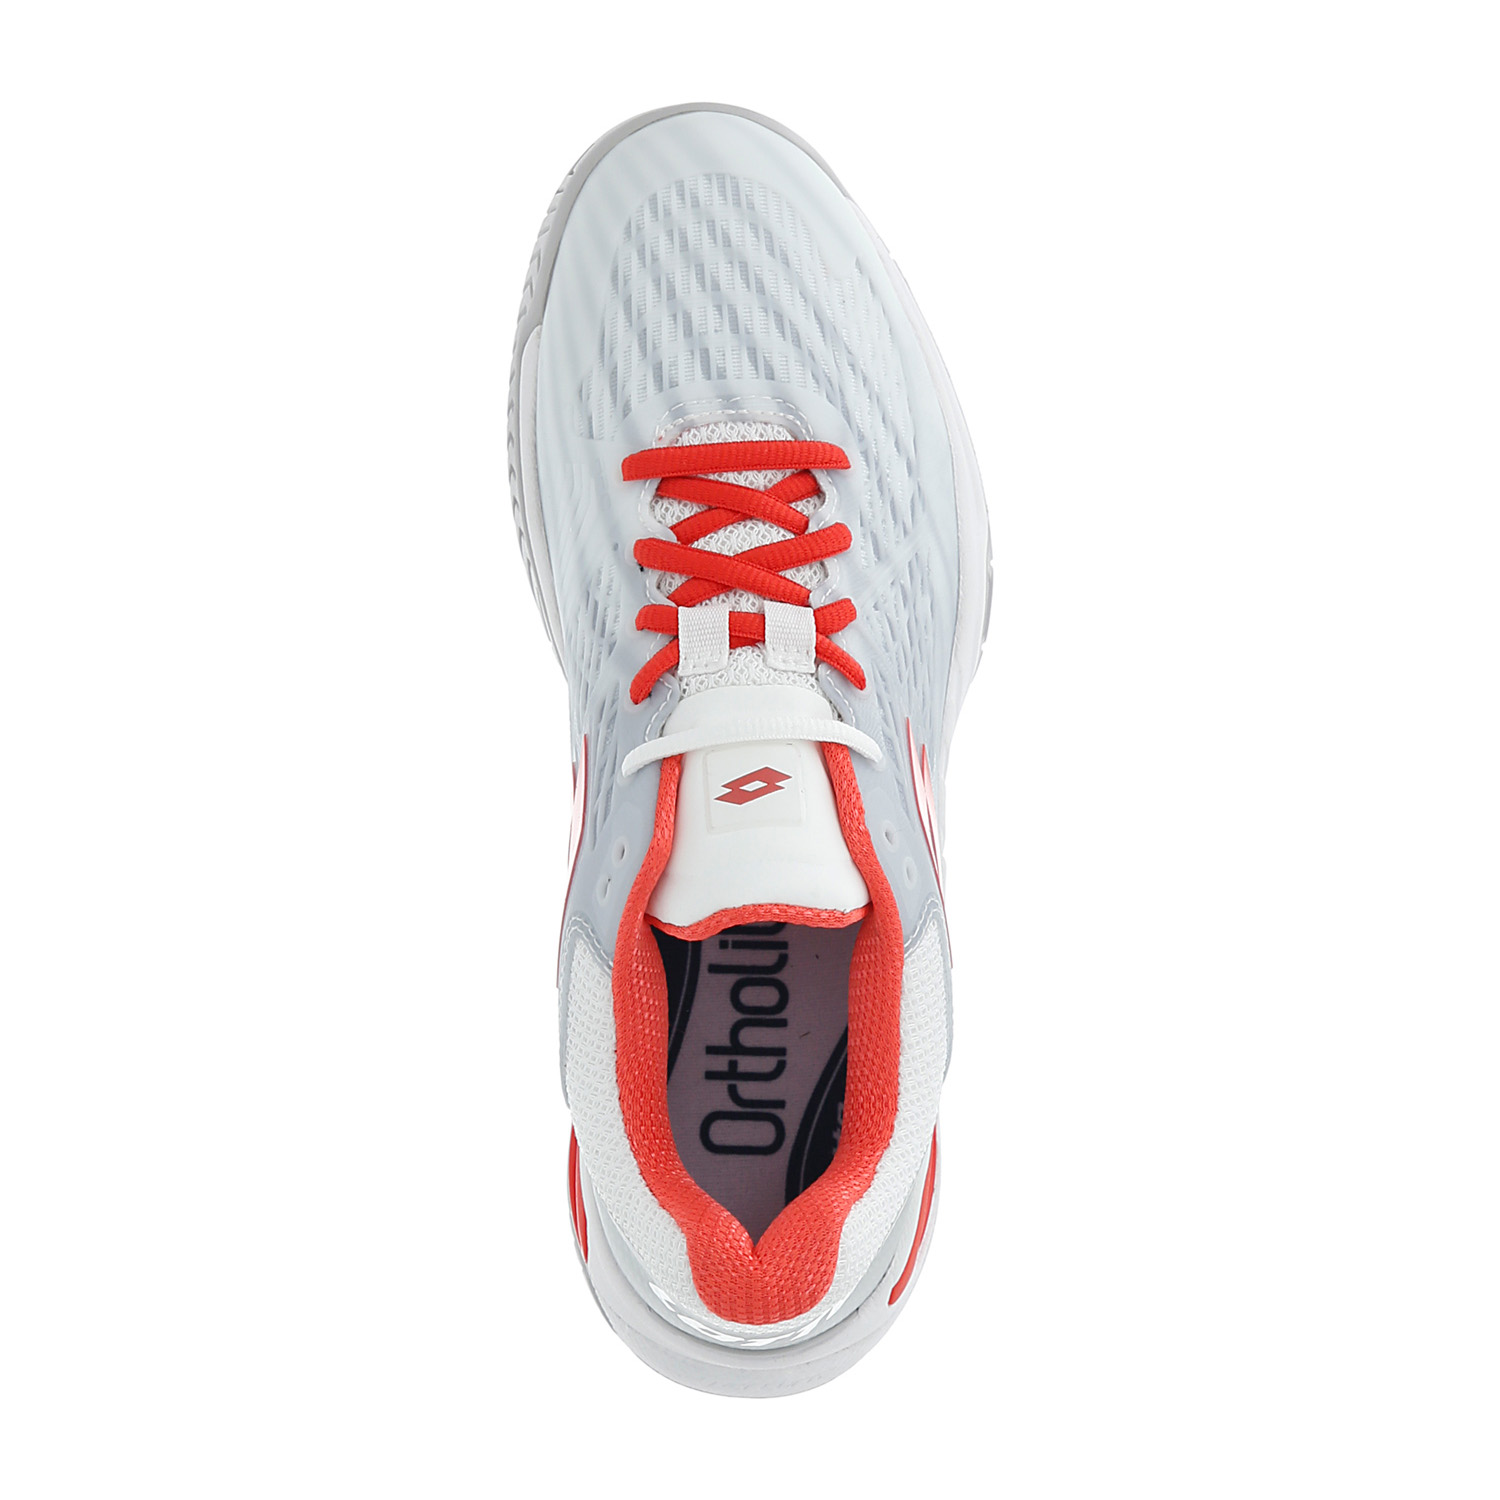 Lotto Mirage 100 Speed Women's Tennis Shoes - All White